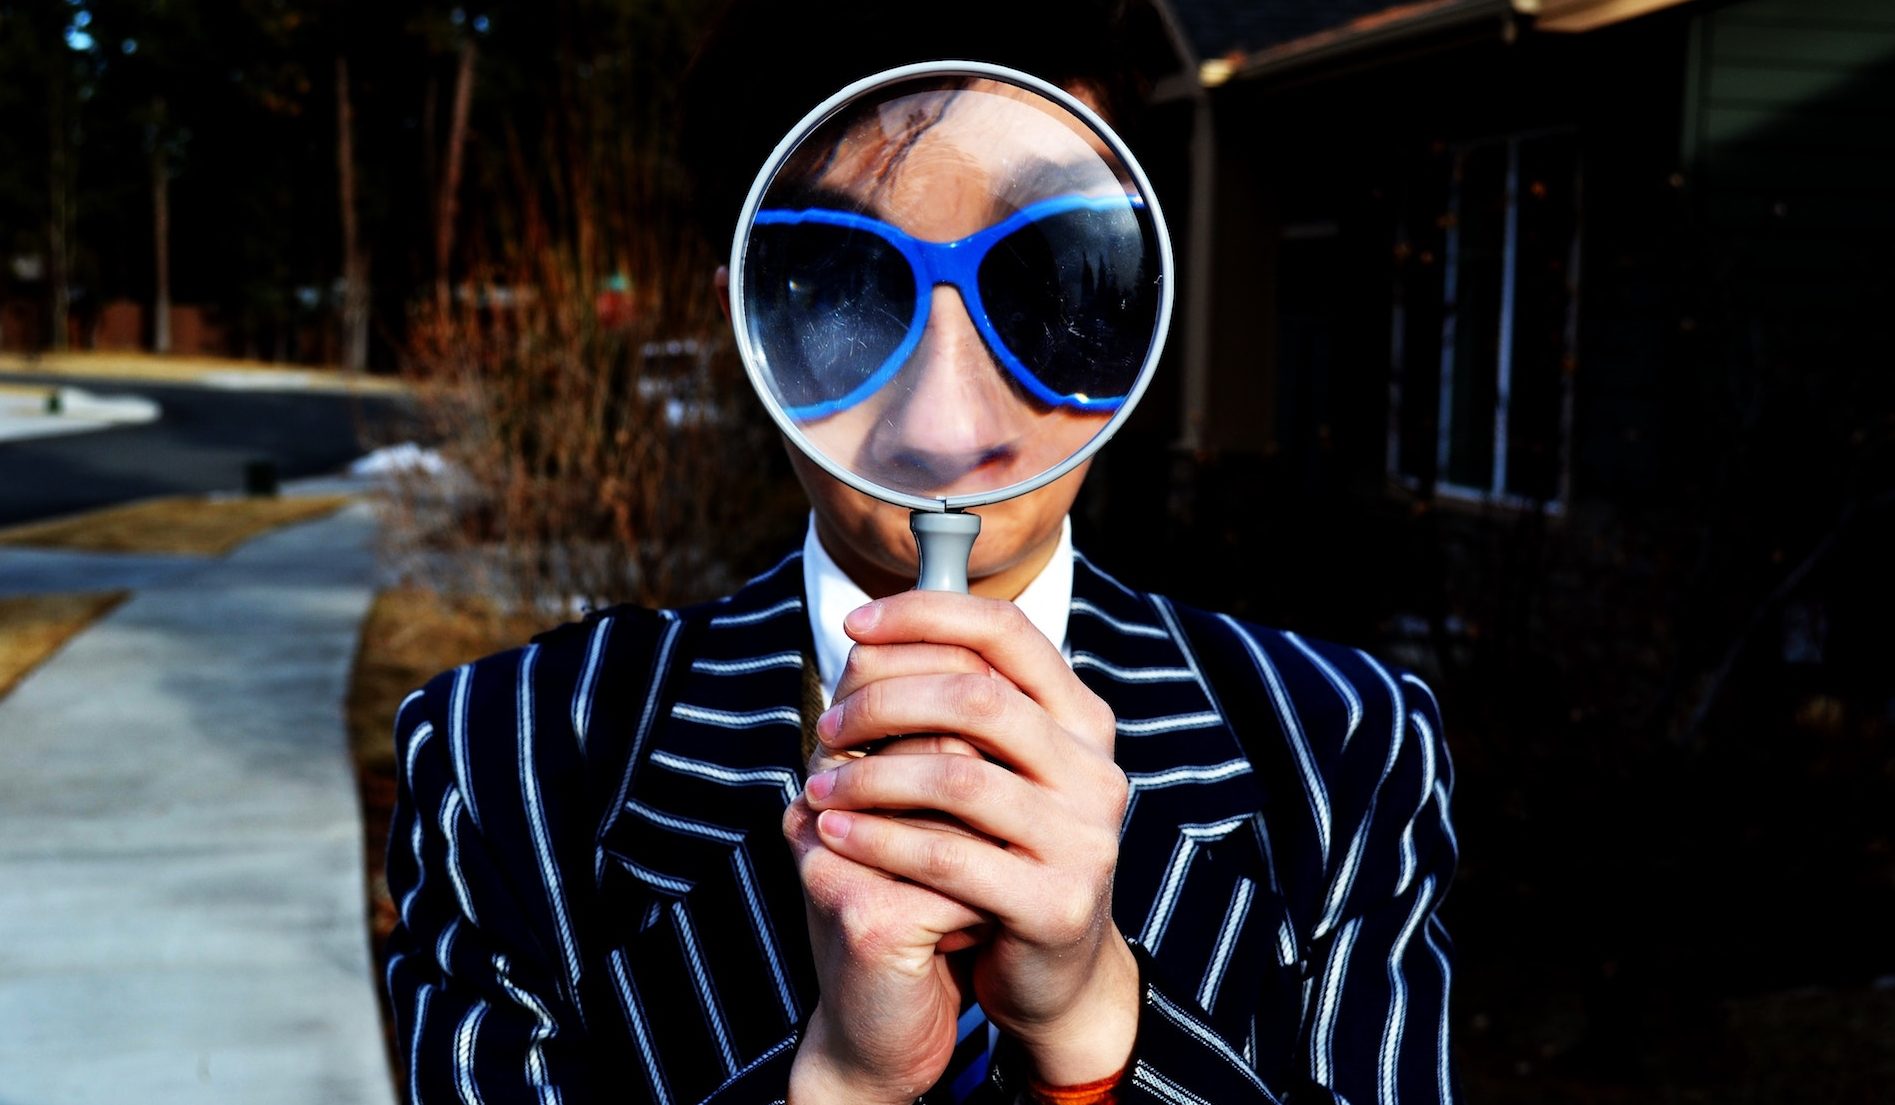 magnifying glass held up to someone's face